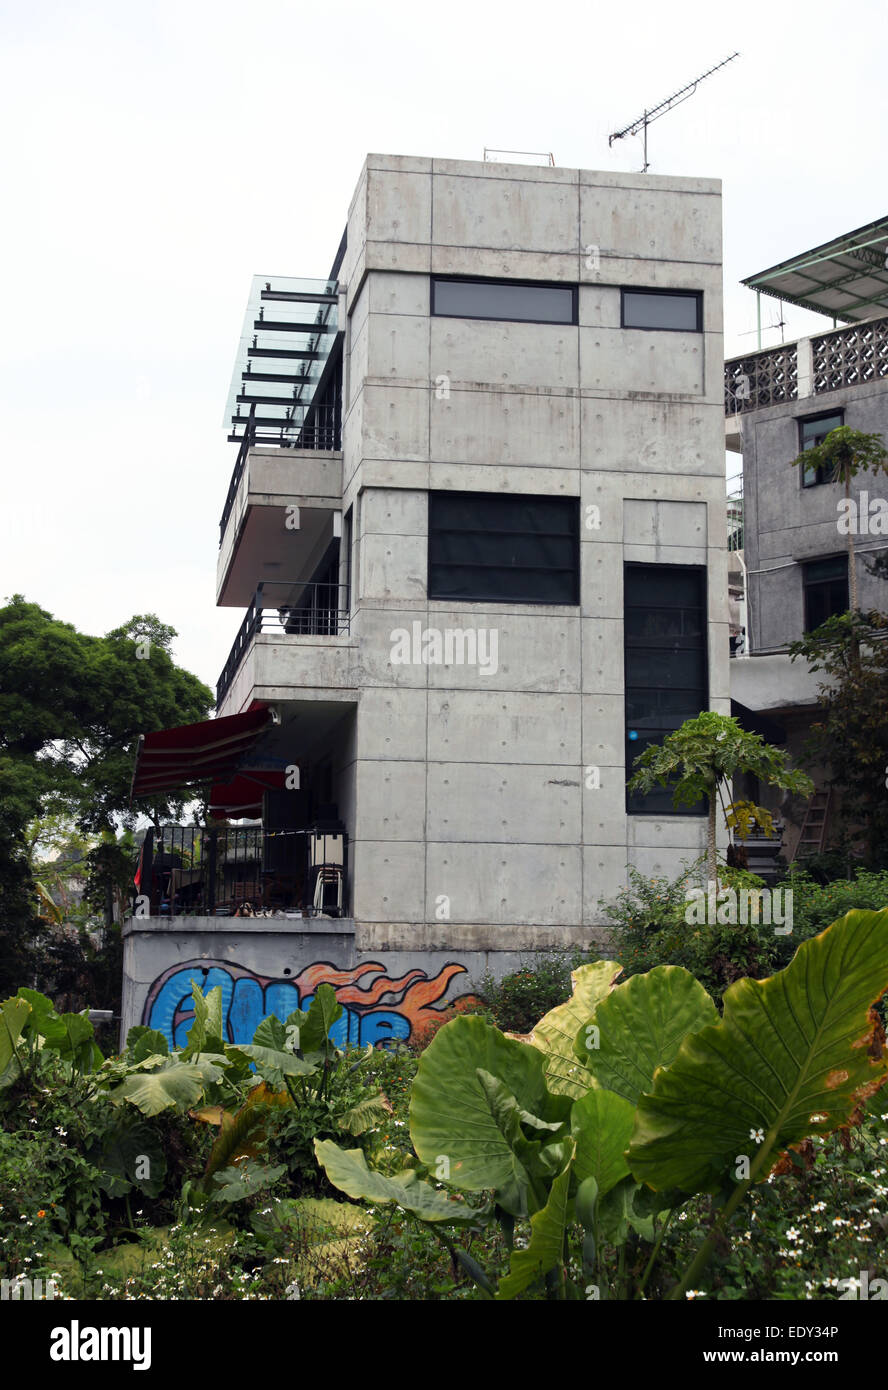 It's a photo of a brand new house in concrete that already has graffiti. It's in a village in Hong Kong Stock Photo